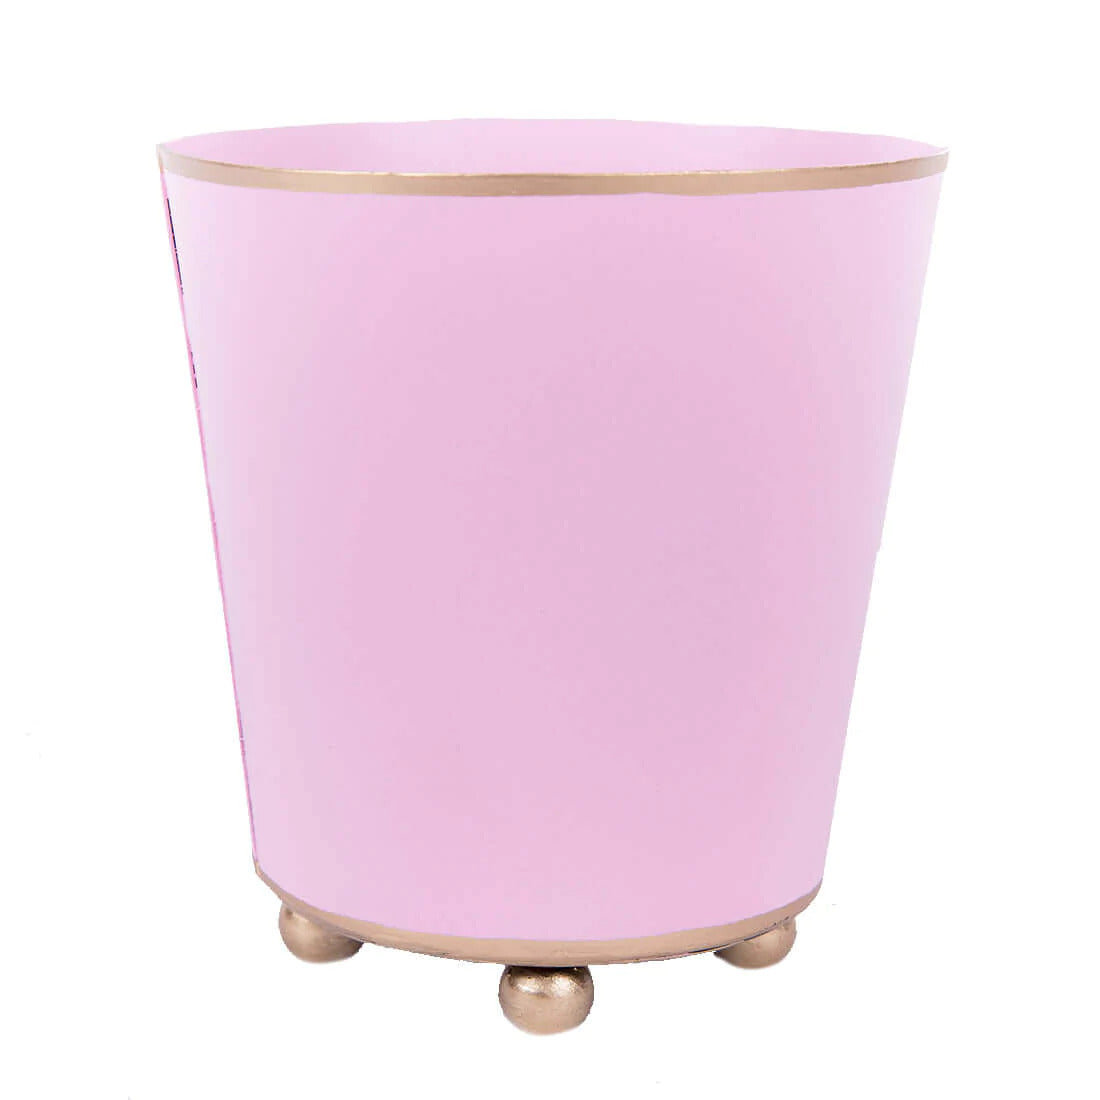 Light Pink Color Block Round Cachepot: Available in Two Sizes